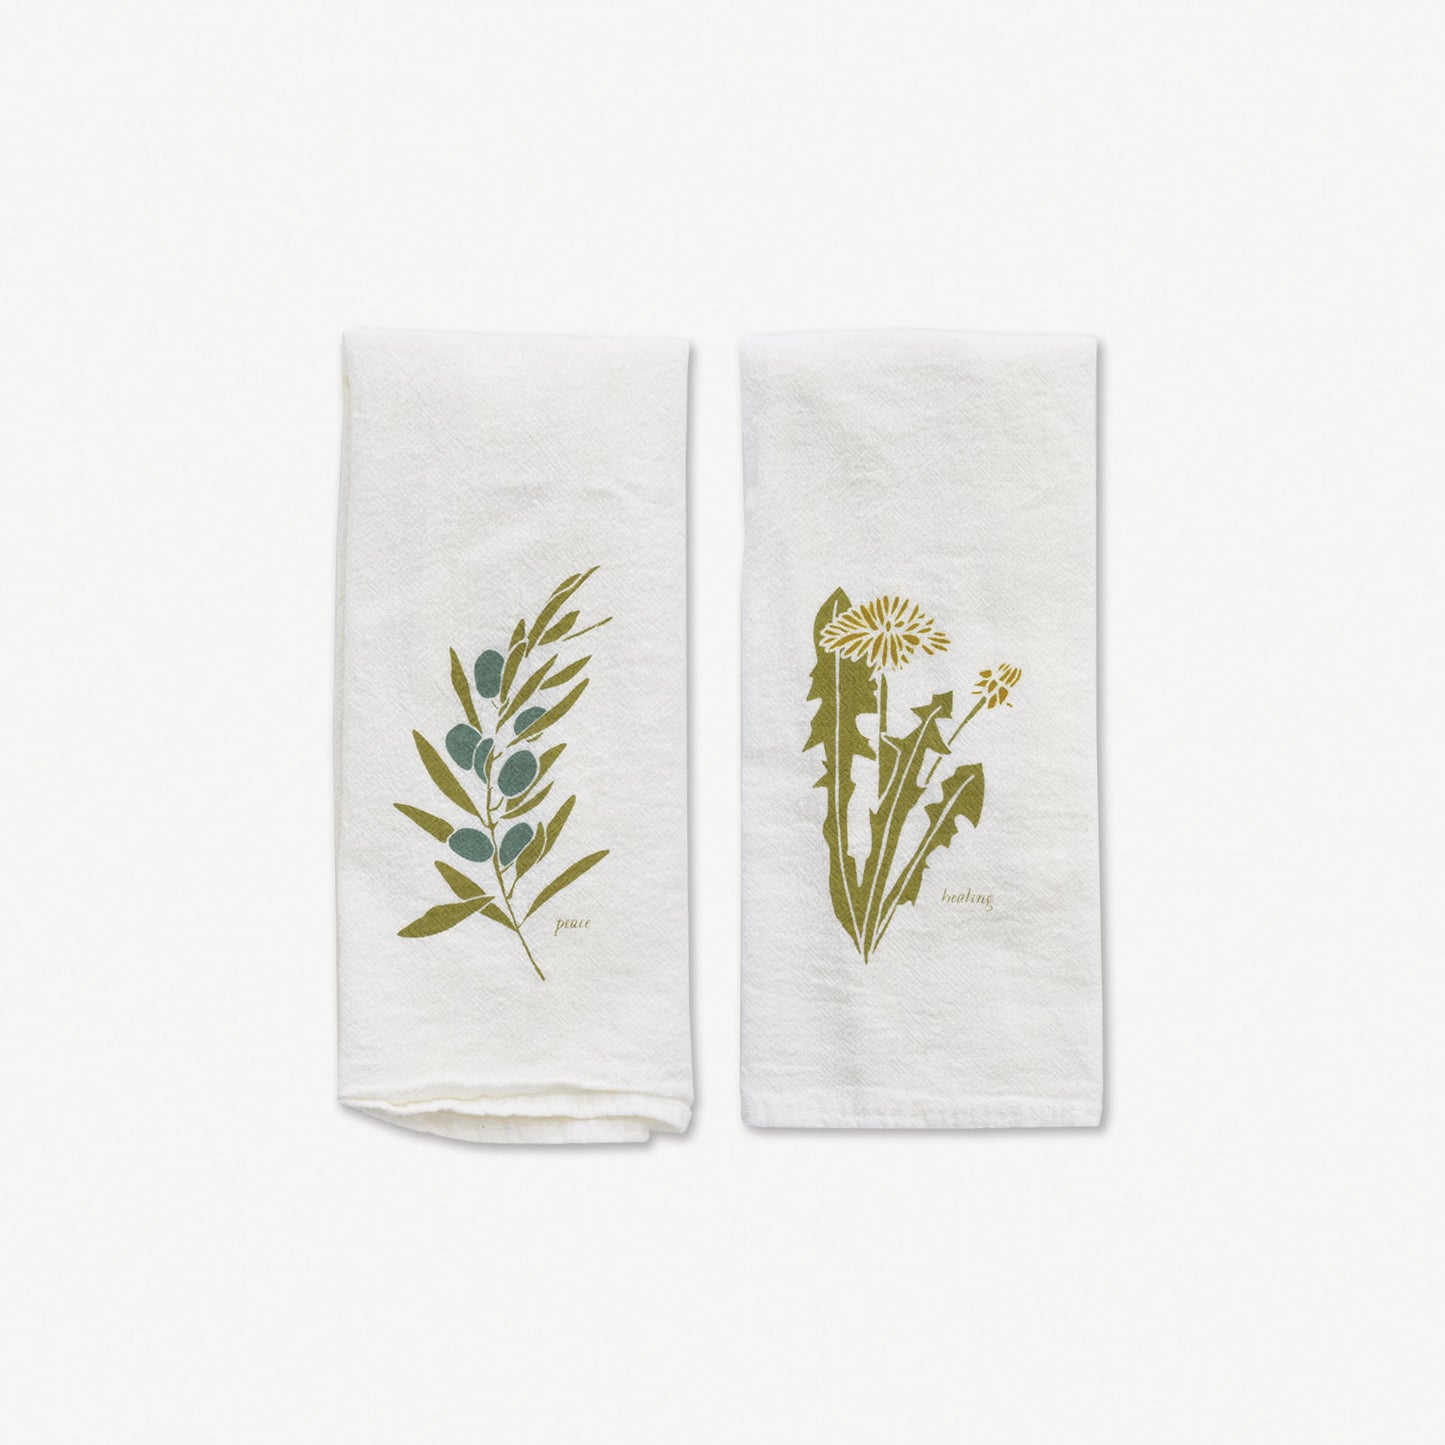 Load image into Gallery viewer, Peace + Healing (Olive + Dandelion) Napkins
